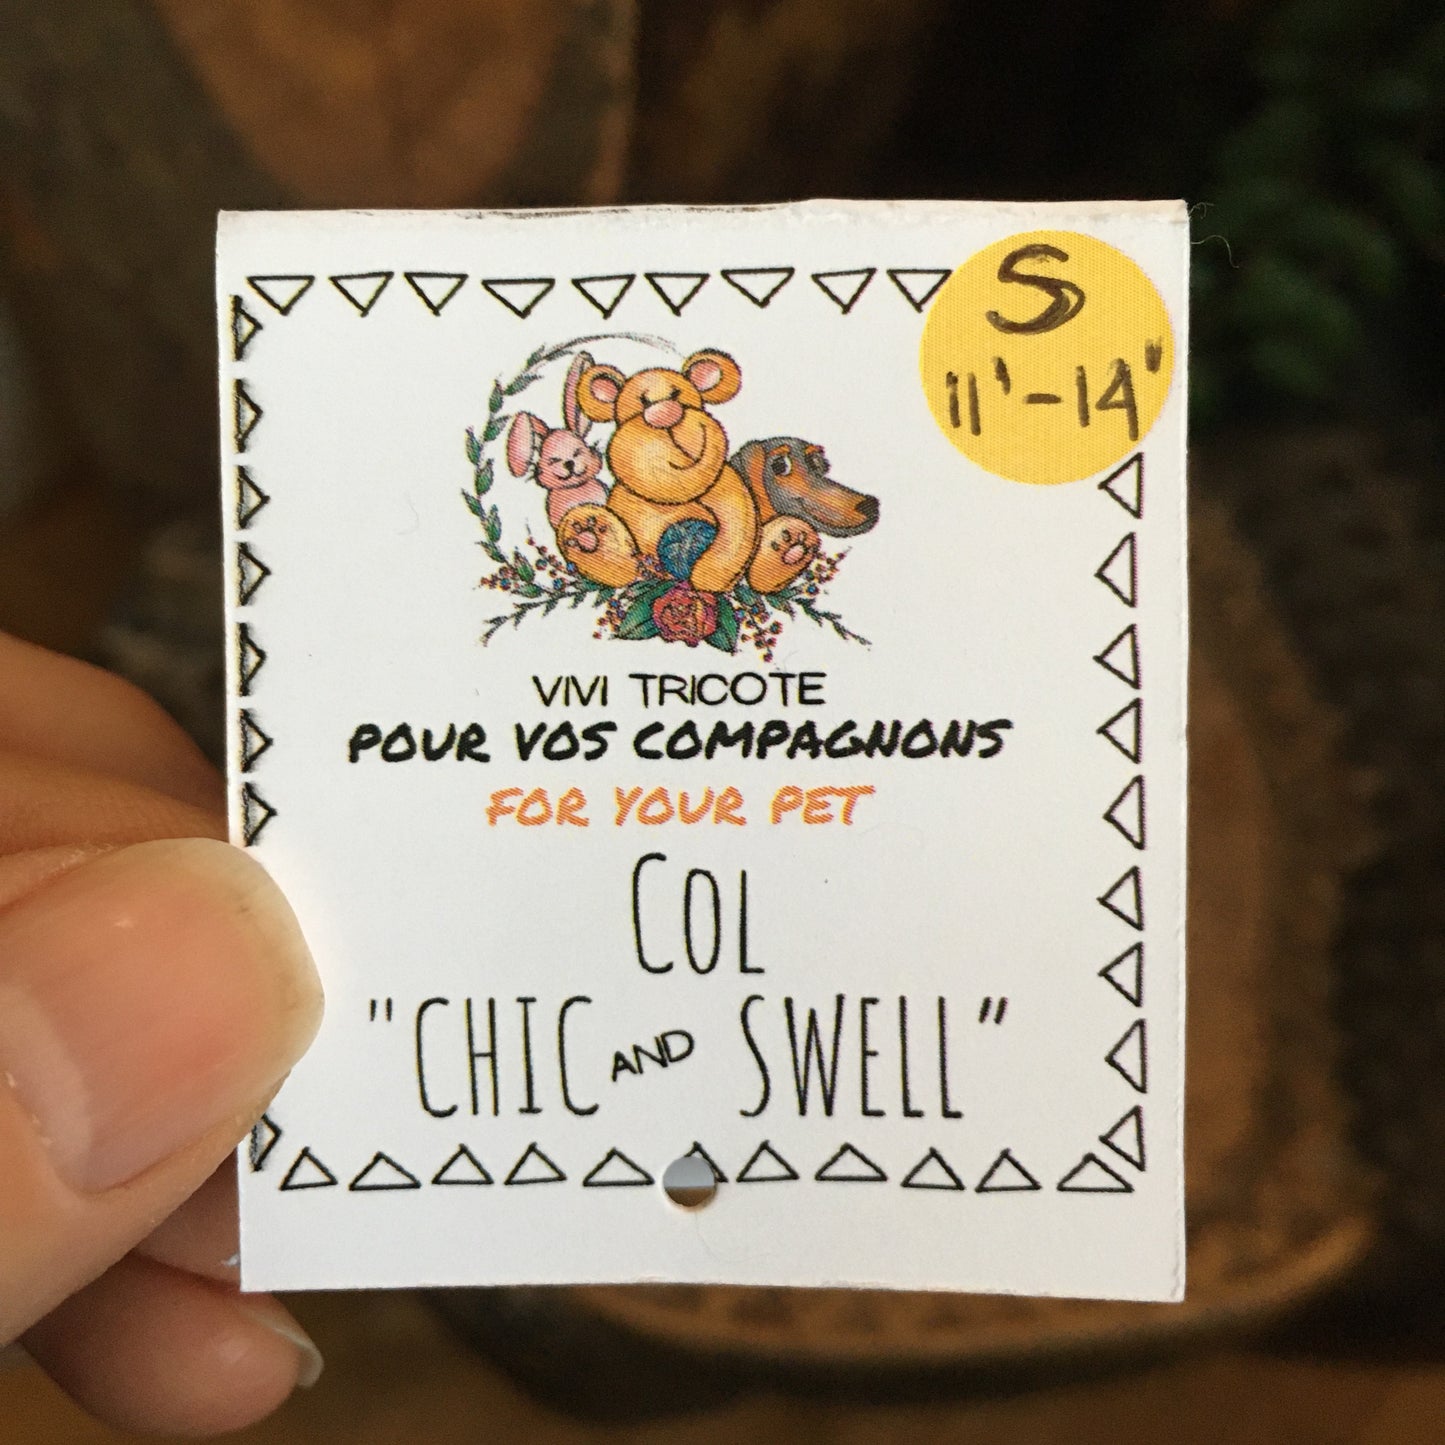 Le Col “CHIC and SWELL” - (Small) - Couleur automne